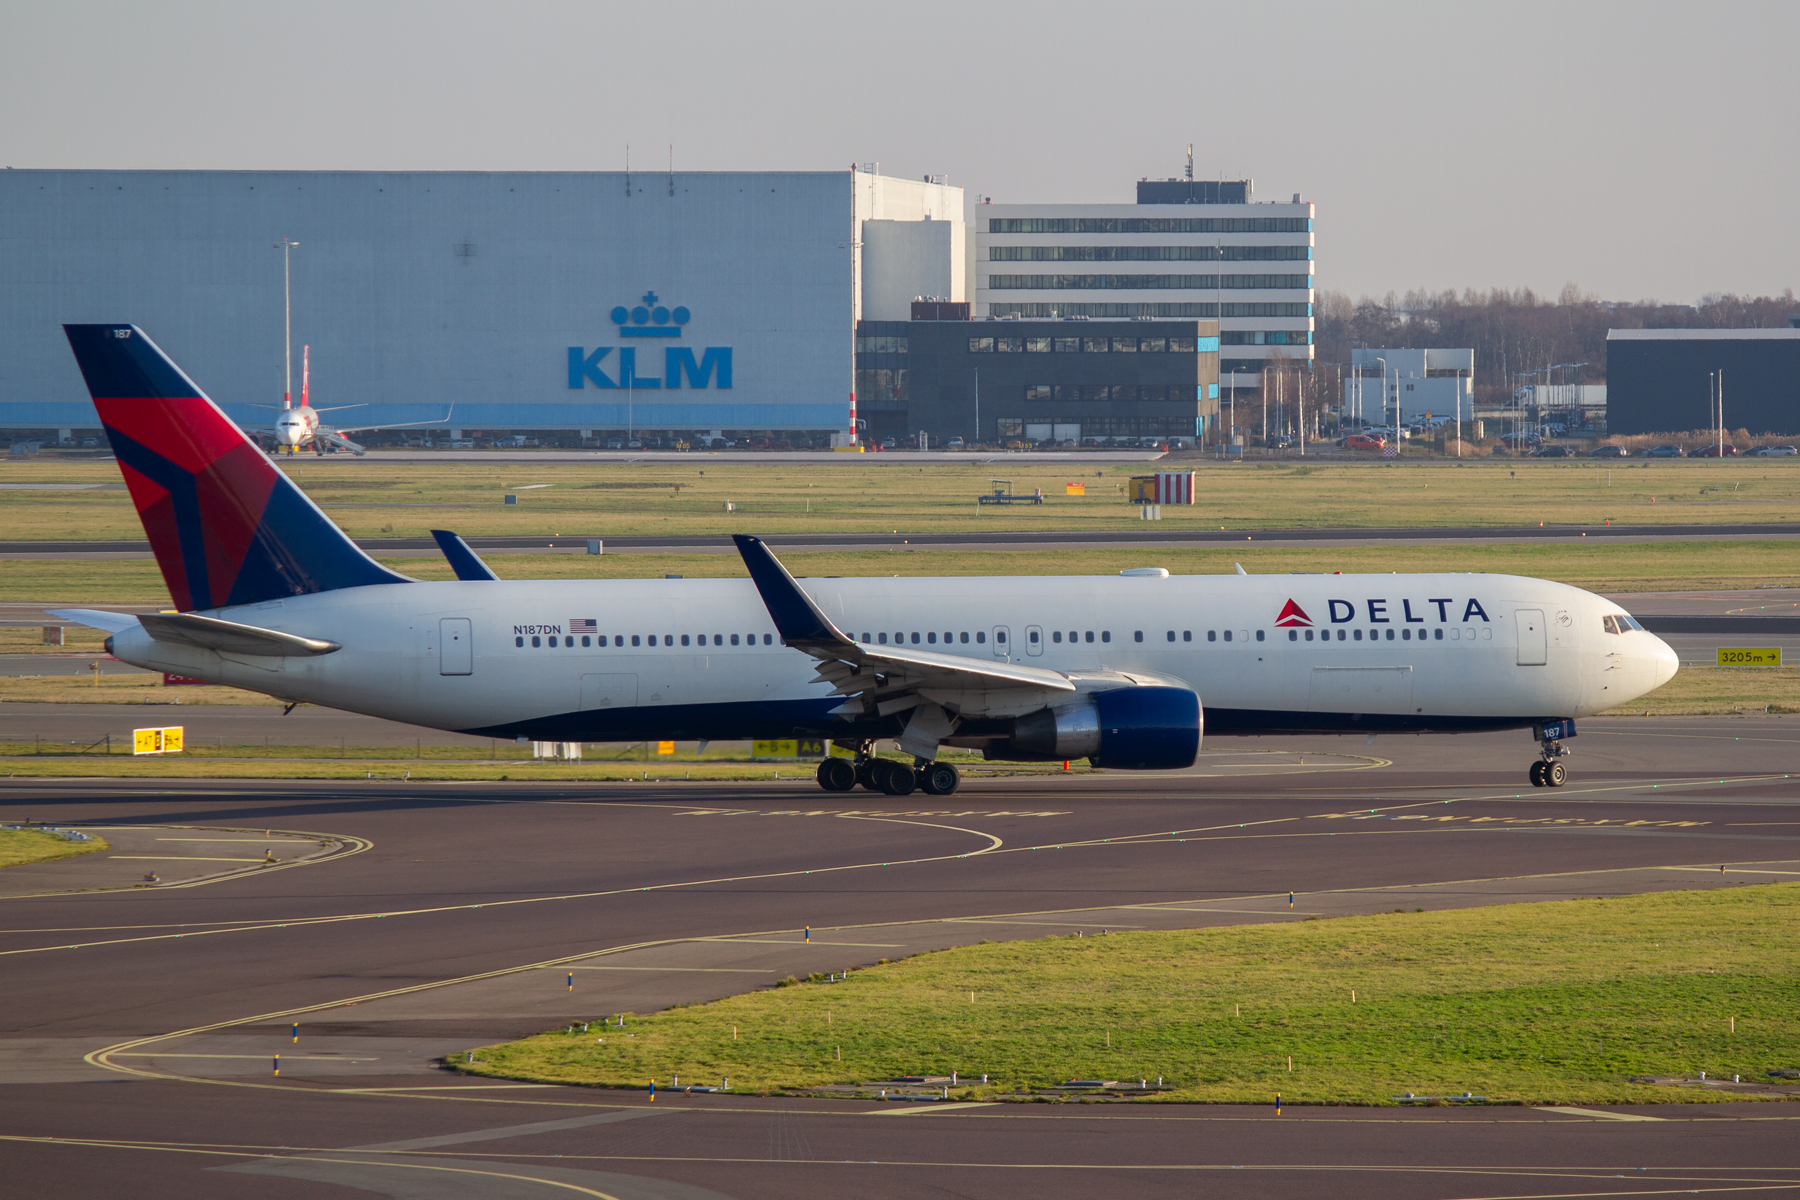 Delta Airlines Boeing 767-300 N187DN at Schiphol